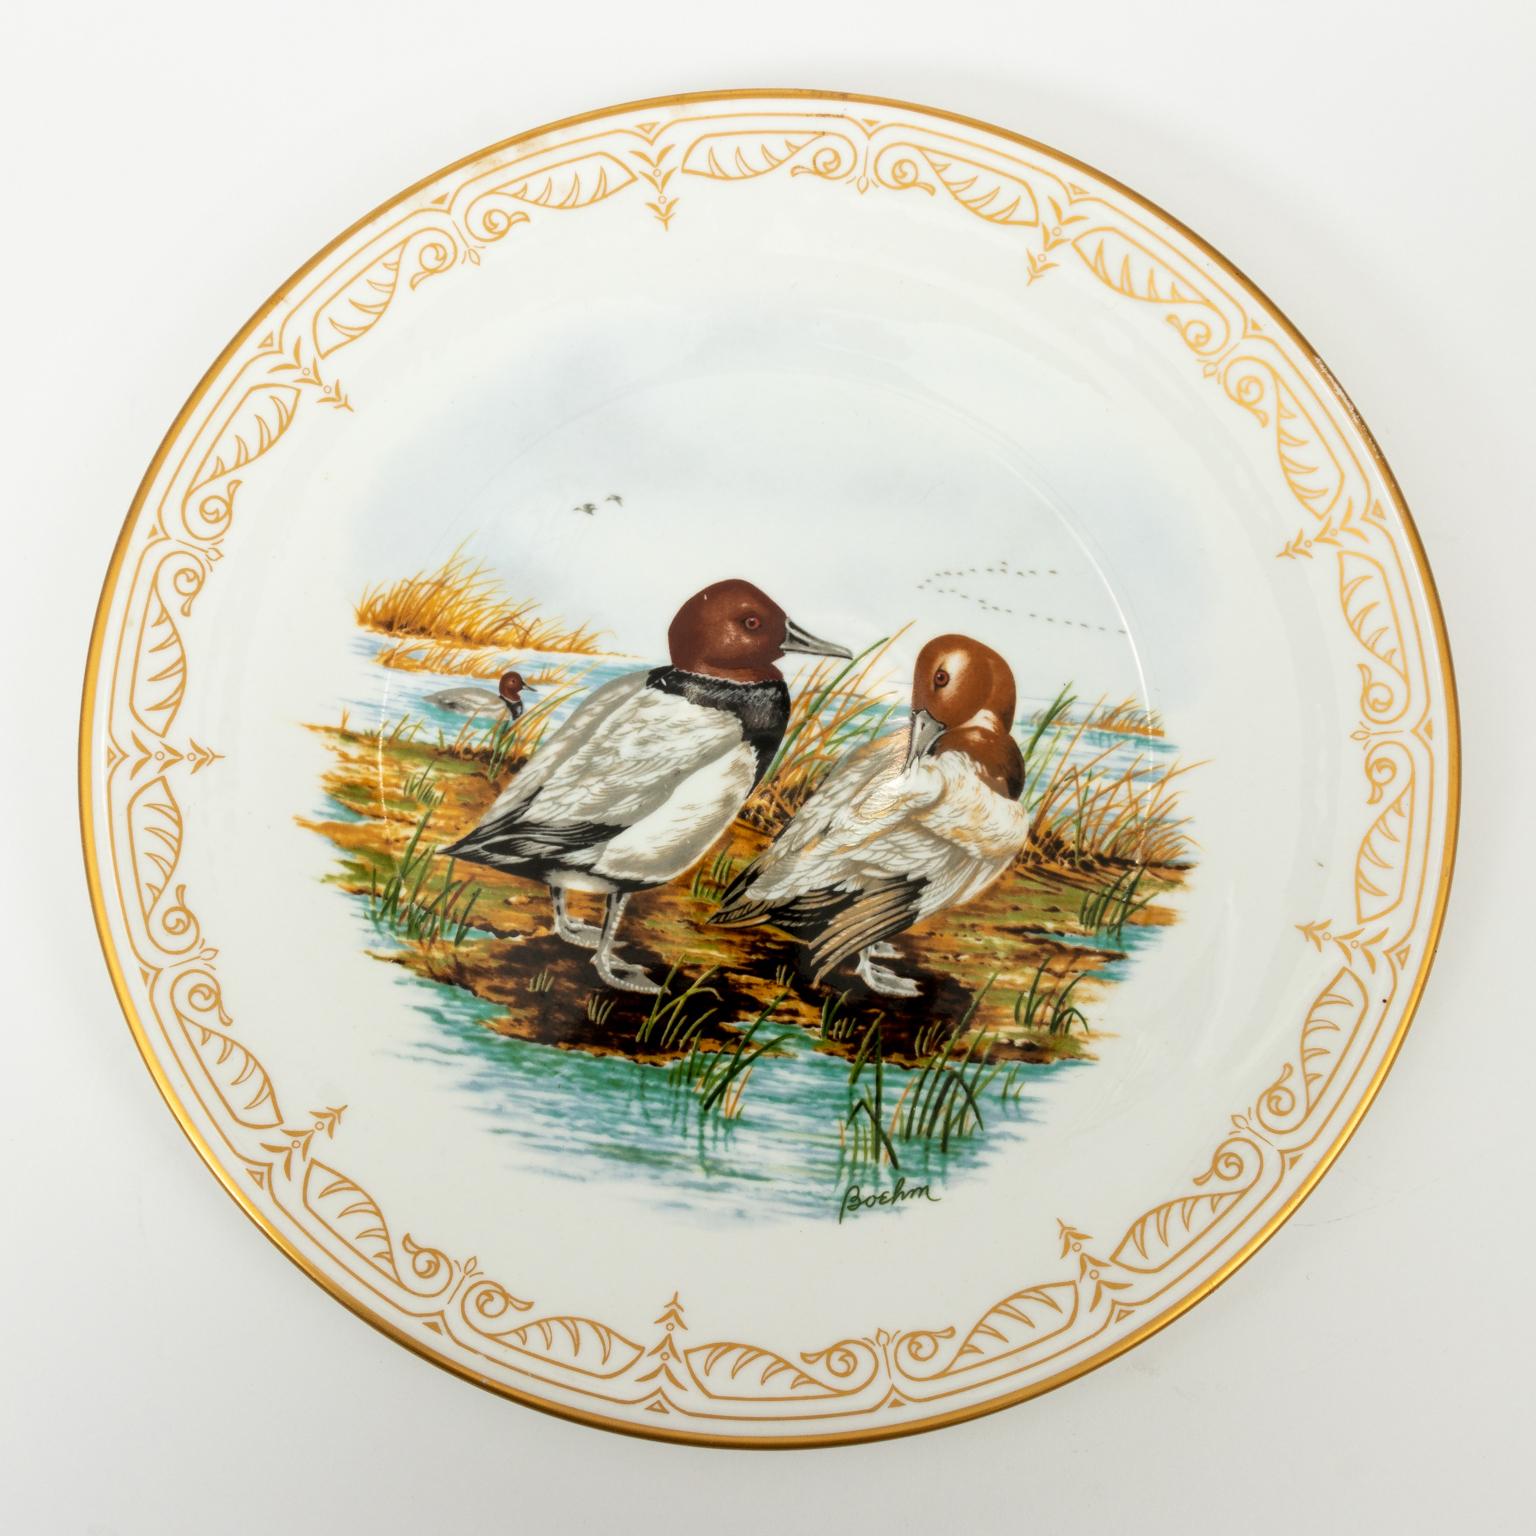 The Edward Marshall Boehm Water Bird Plate Collection Wood Ducks